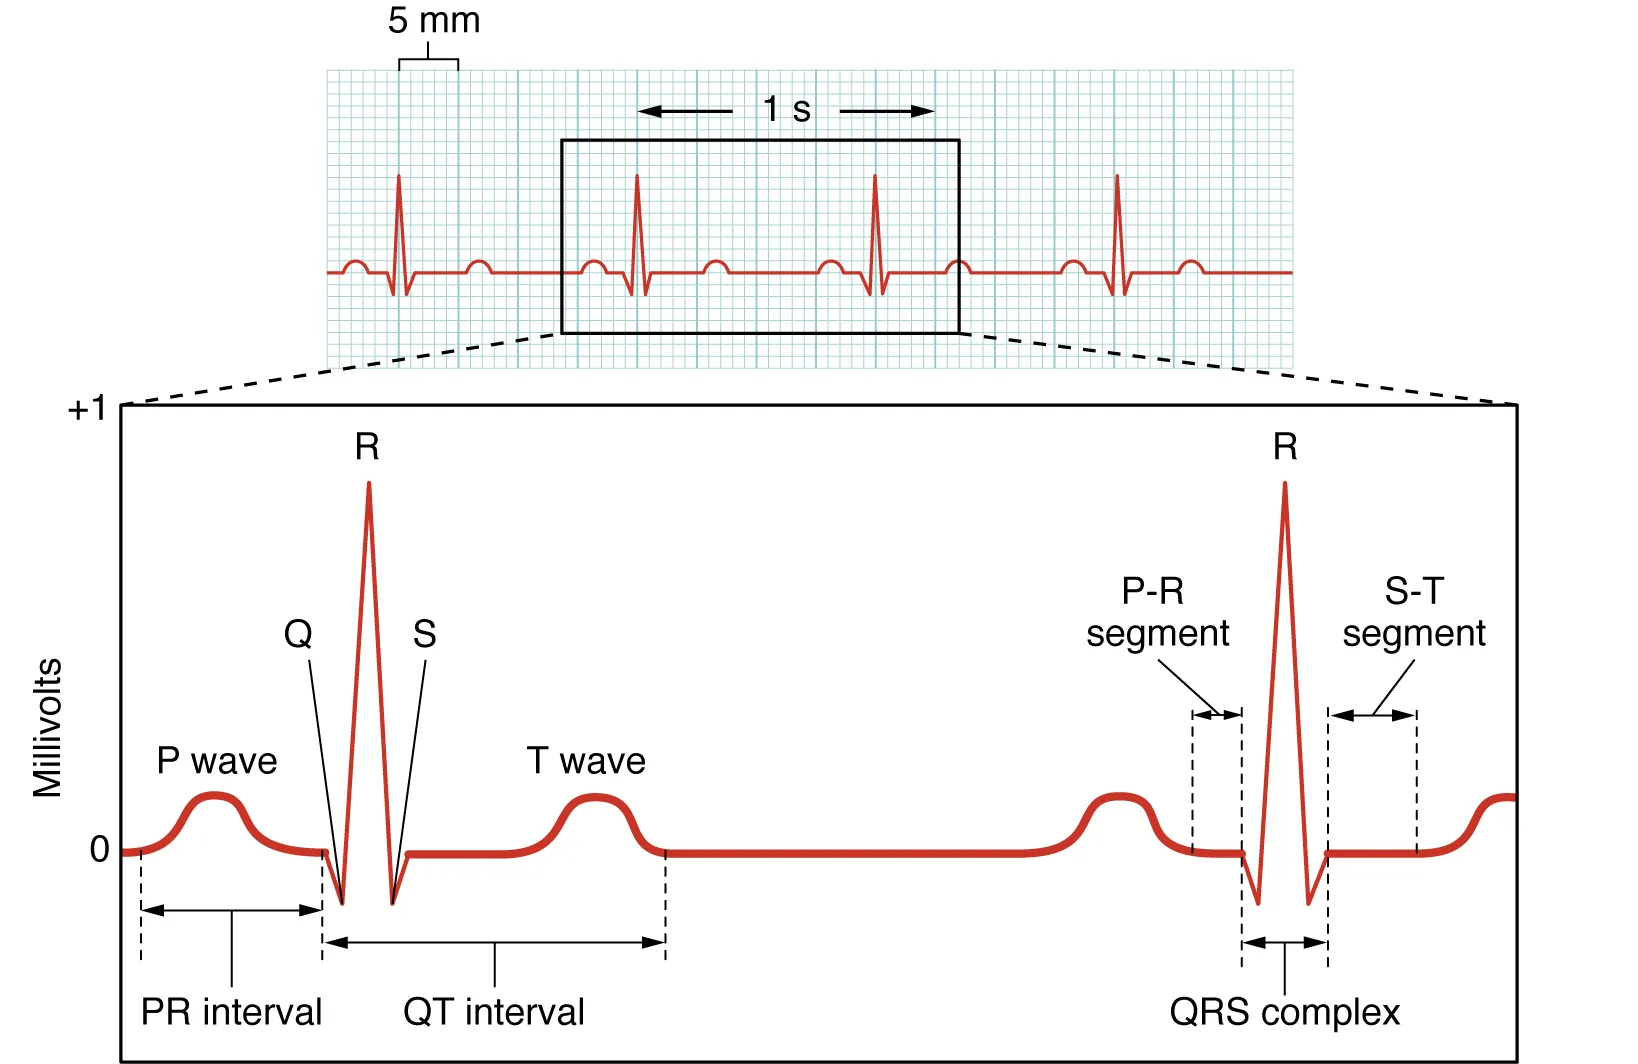 This figure shows a graph of millivolts over time and the heart cycles during an ECG.